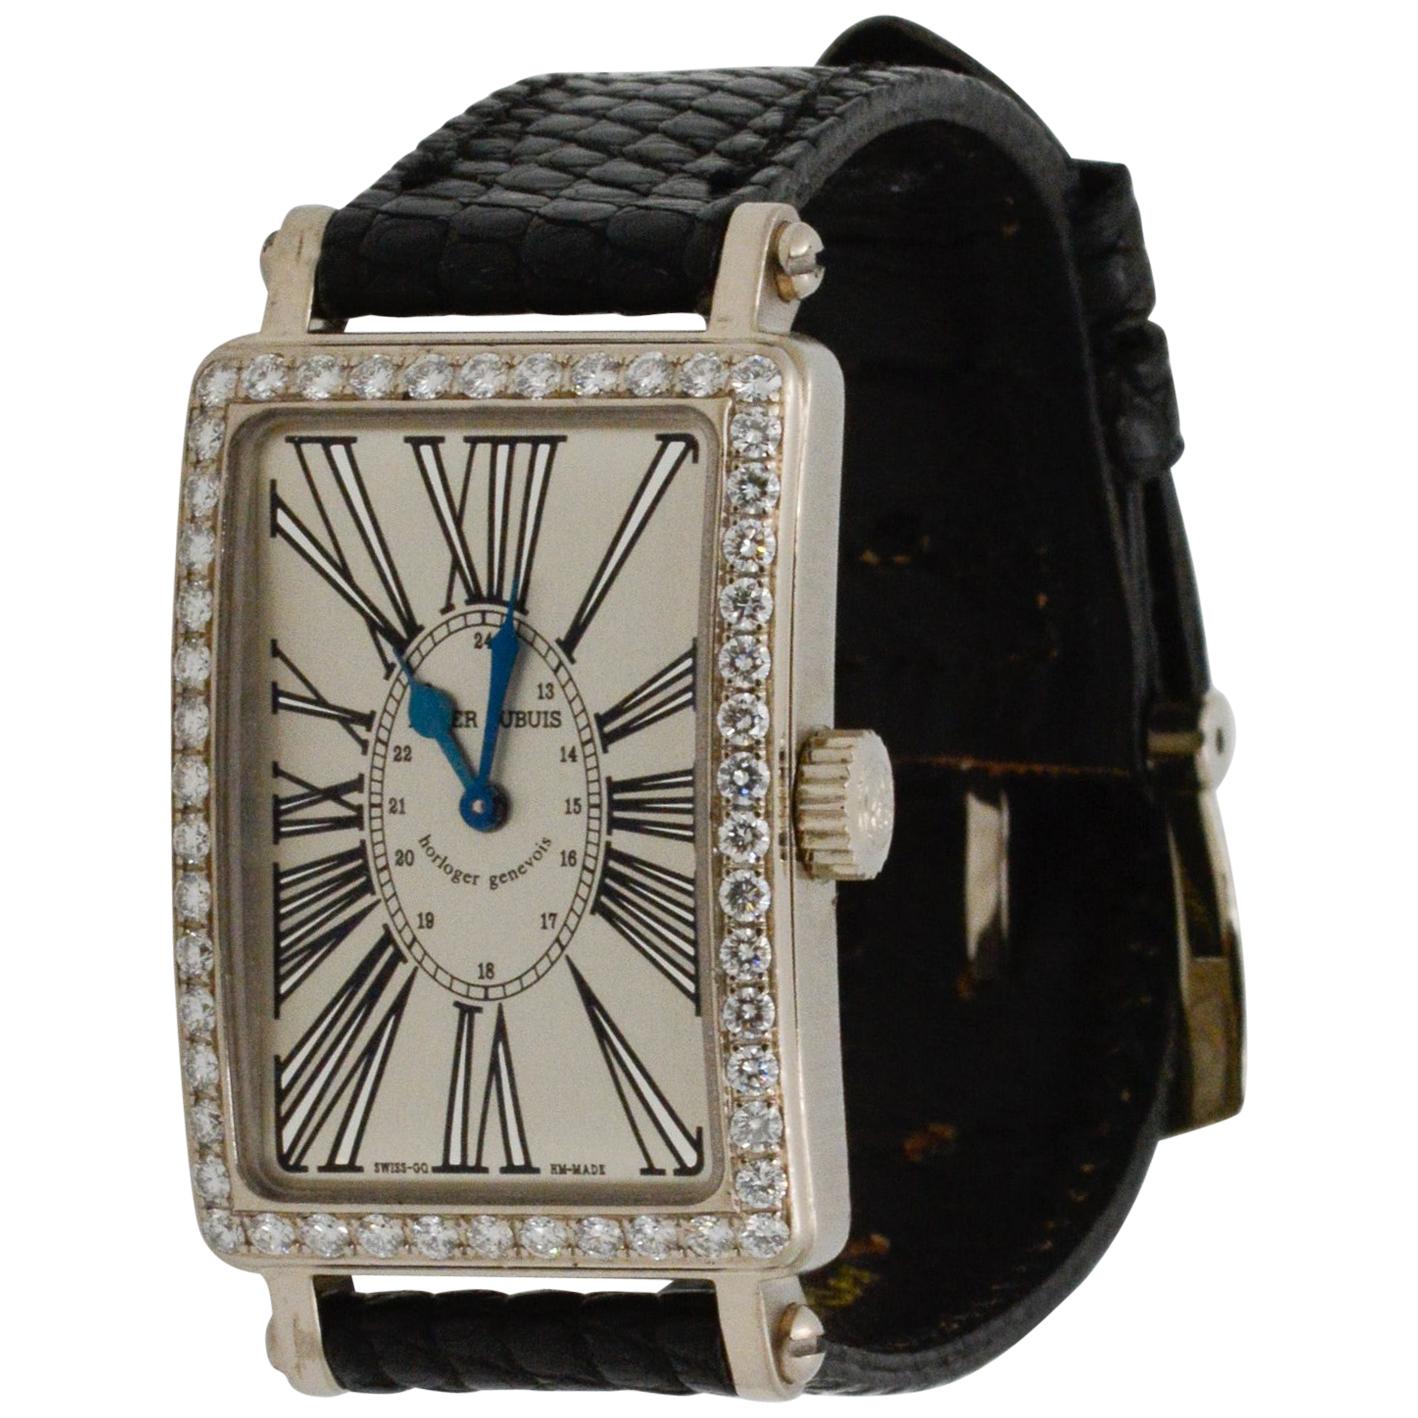 Model: Roger Dubuis Muchmore #203546
Case Materia: 18k White Gold 
Dial: Rectangular Silver Roman with Diamond Bezel 
Strap: Black with Tang Buckle 
Circa 2000, Papers only
